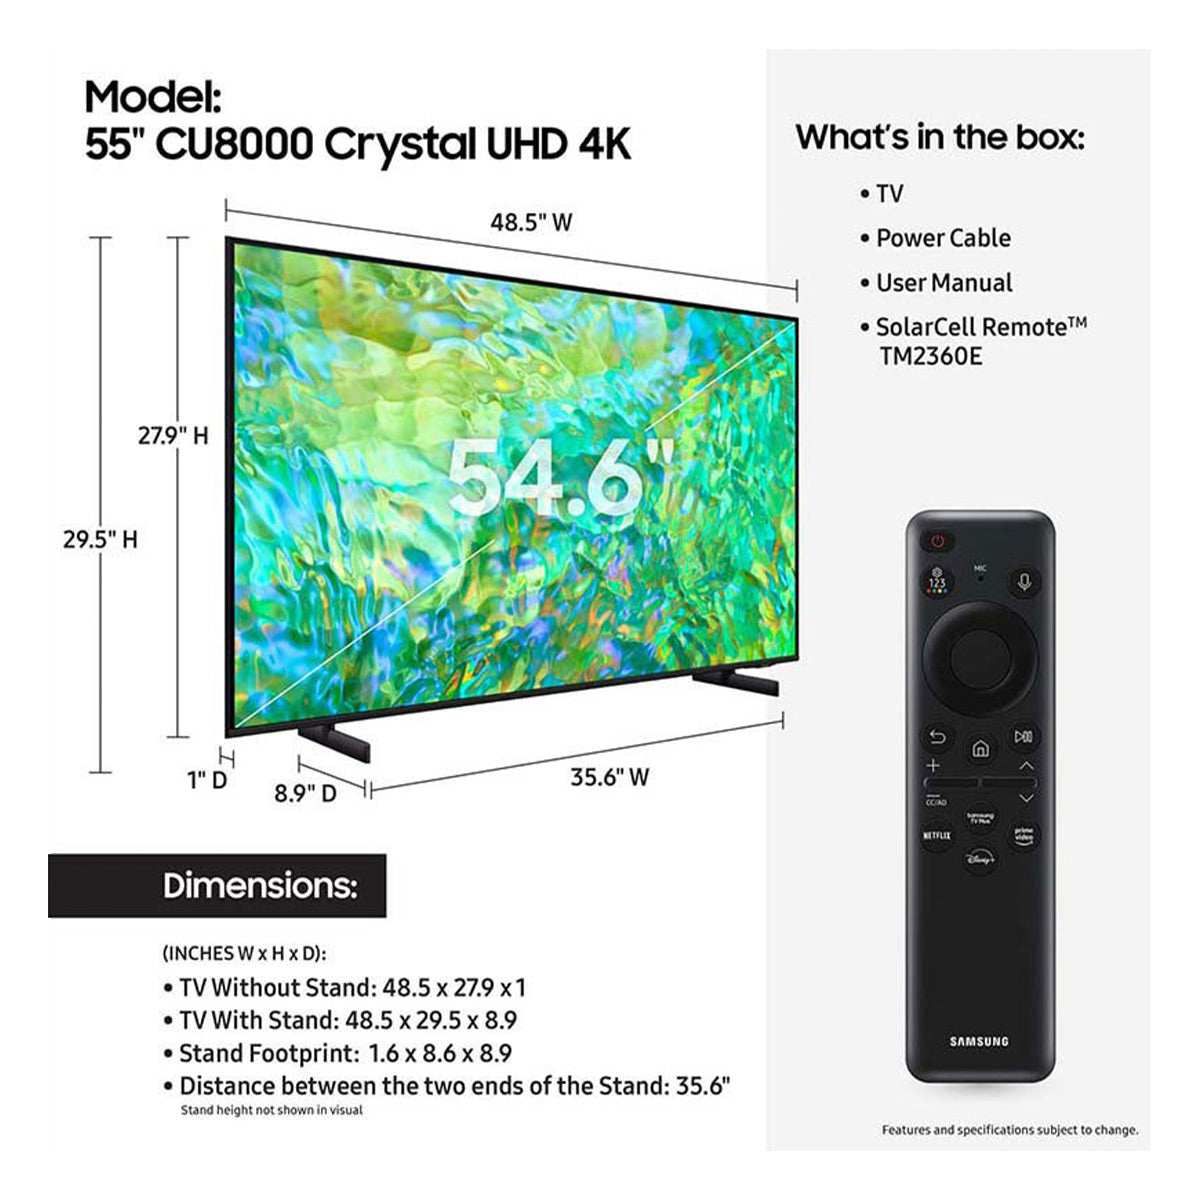 Samsung UN55CU8000 55" Crystal UHD 4K Smart TV with HDR, Object Tracking Sound Lite, & 4K Upscaling (2023)